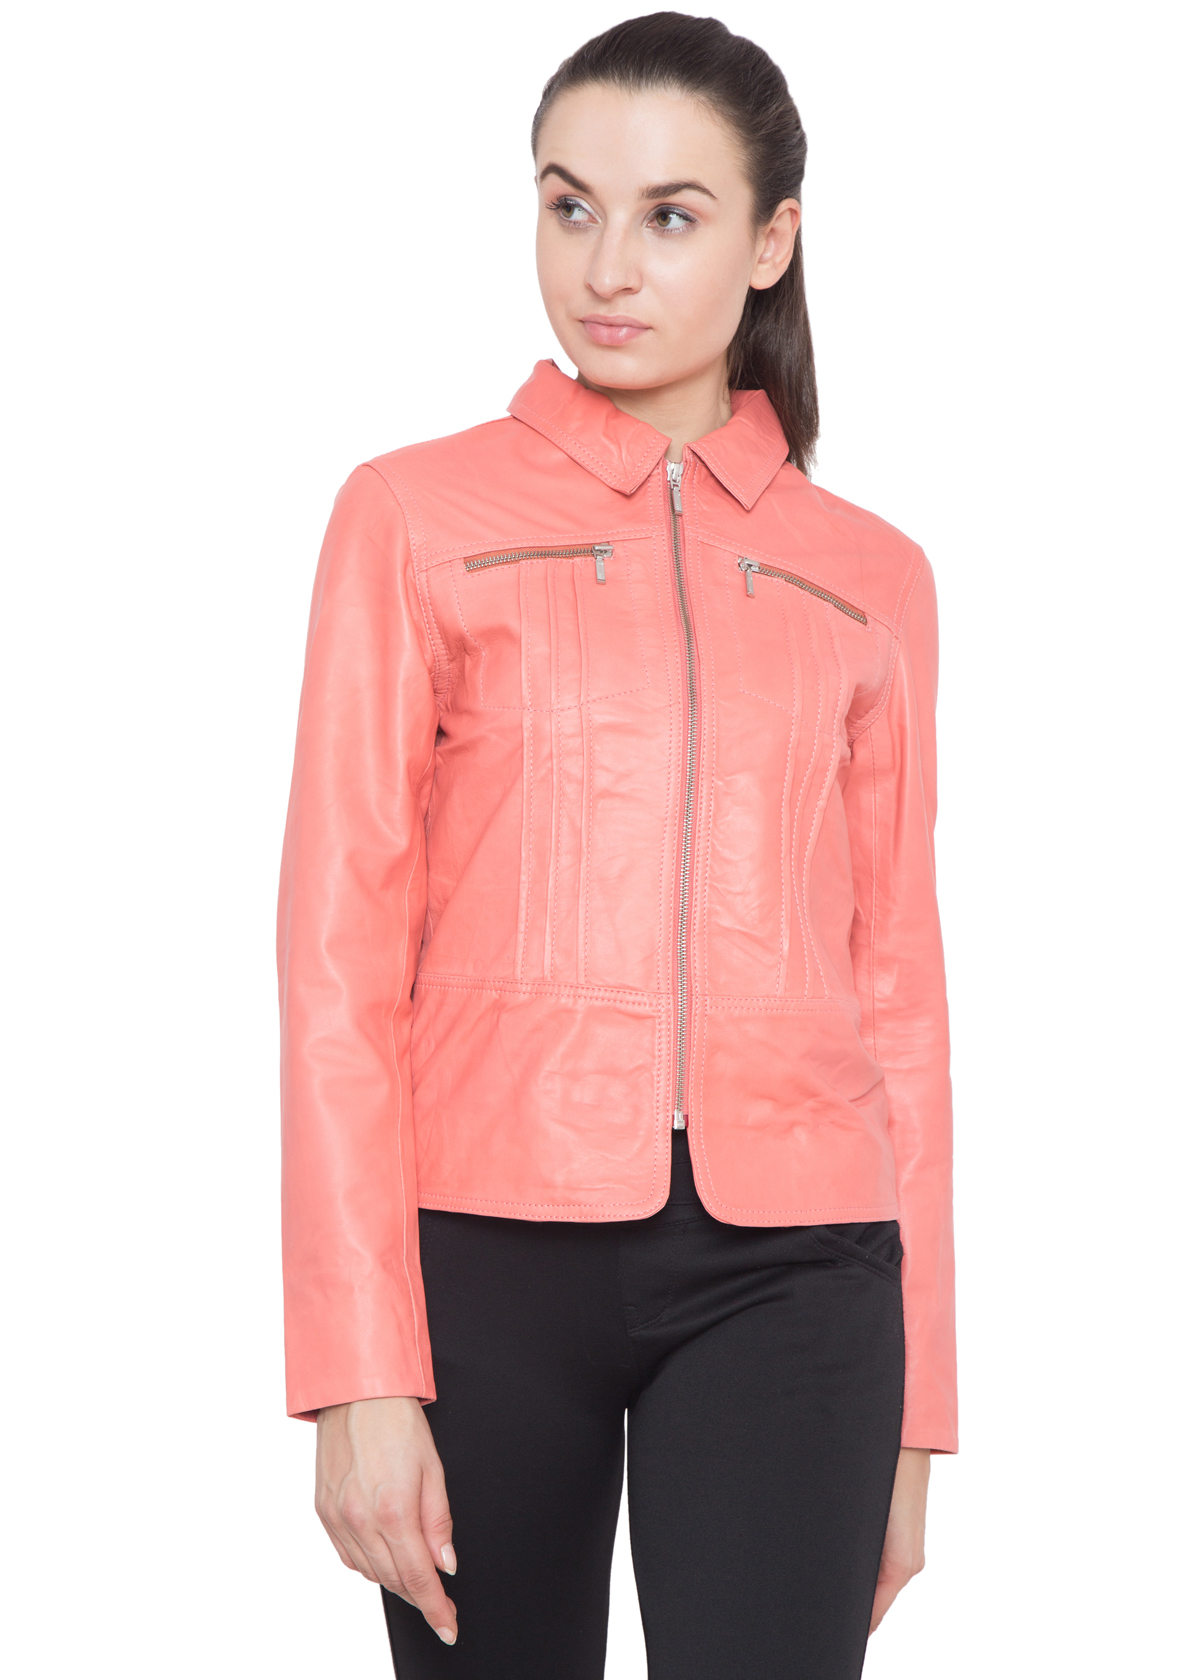 PINK CORAL FULL LEATHER JACKET-WOMEN – Caliber Apparels